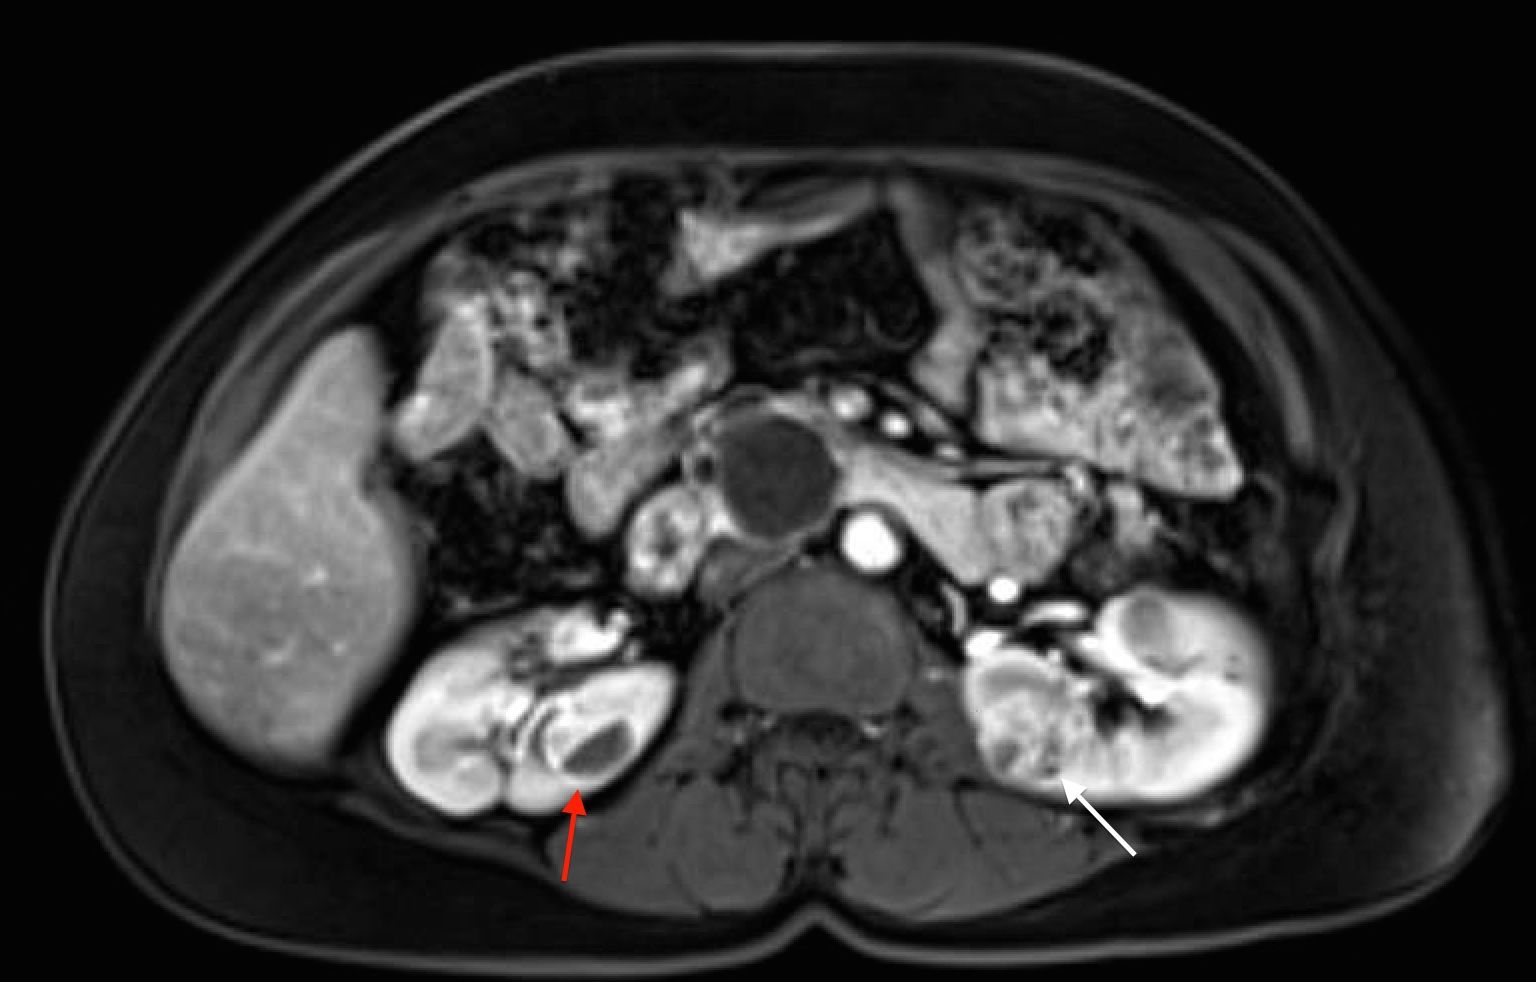 Axial view of an individual’s midsection showing tumors in both kidneys. The left kidney has a tumor with a dark cystic component and the right kidney has a predominantly solid tumor.